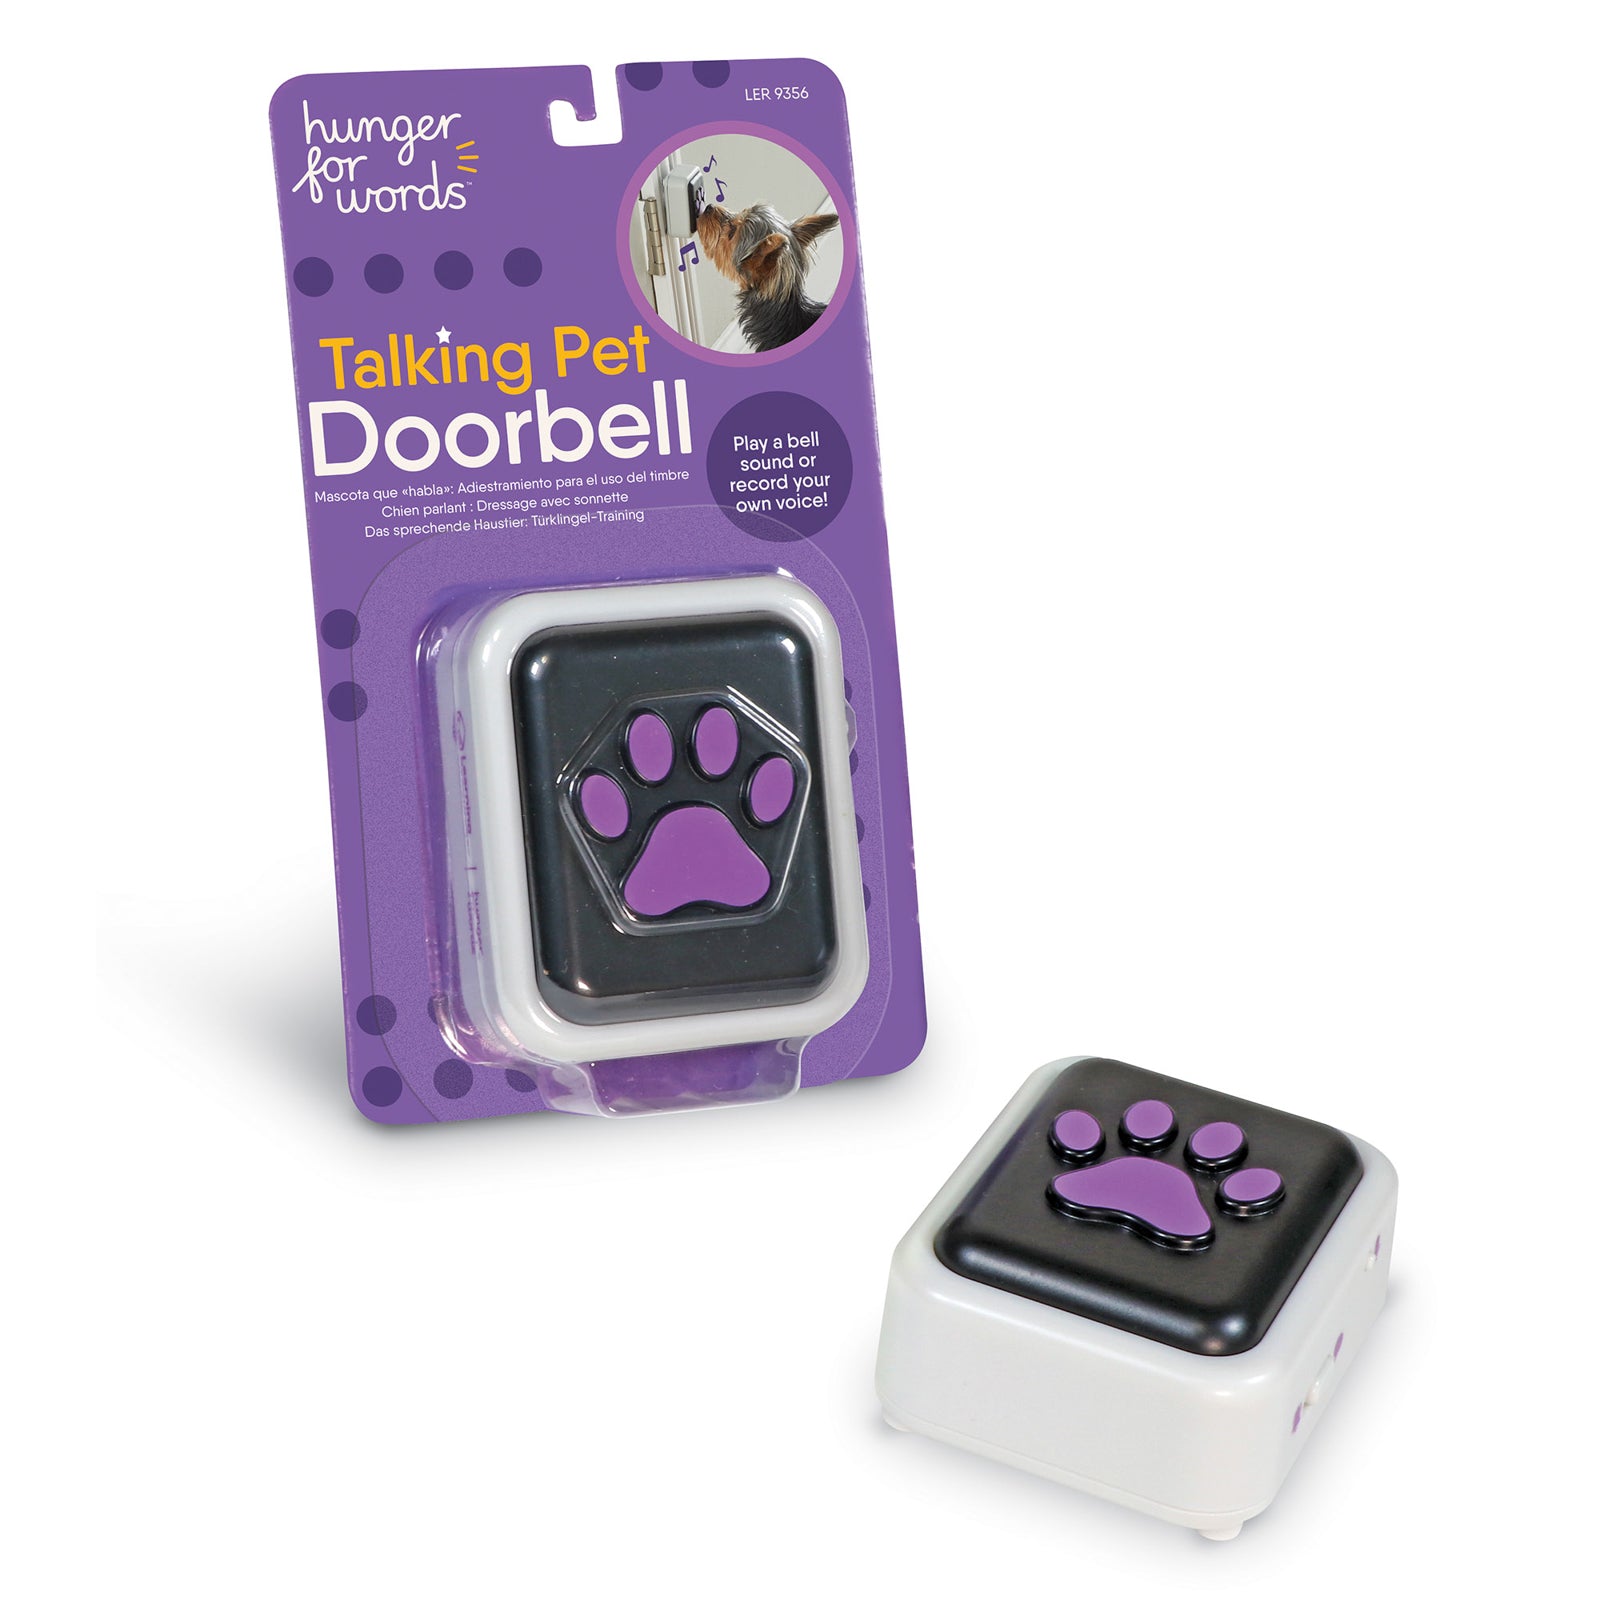 A black plastic pet doorbell with a pawprint on it, next to a package containing the same doorbell